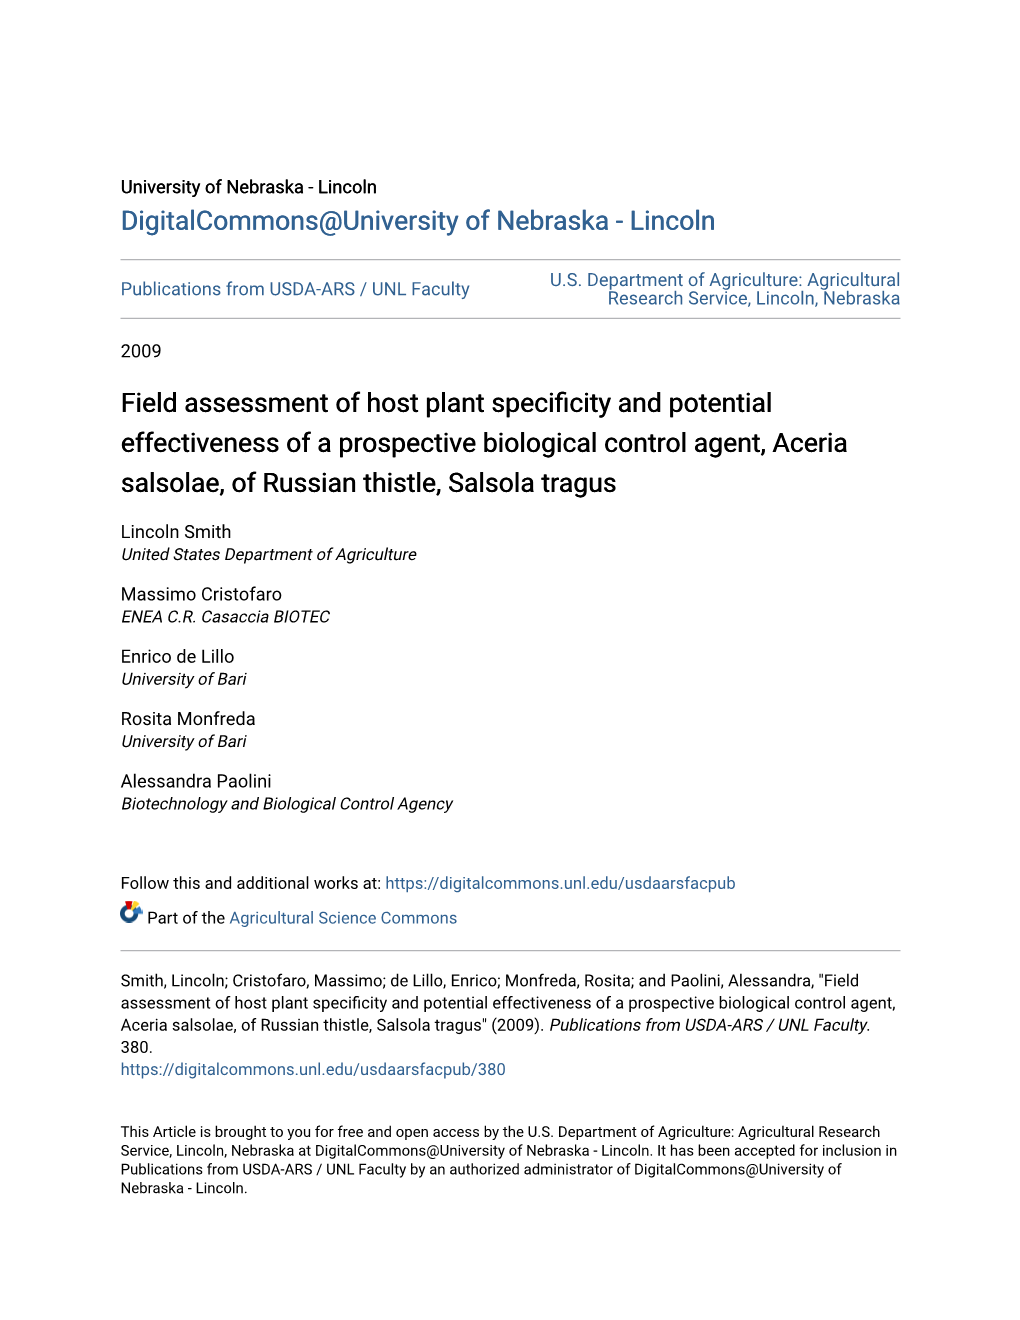 Field Assessment of Host Plant Specificity and Potential Effectiveness of a Prospective Biological Control Agent, Aceria Salsolae, of Russian Thistle, Salsola Tragus